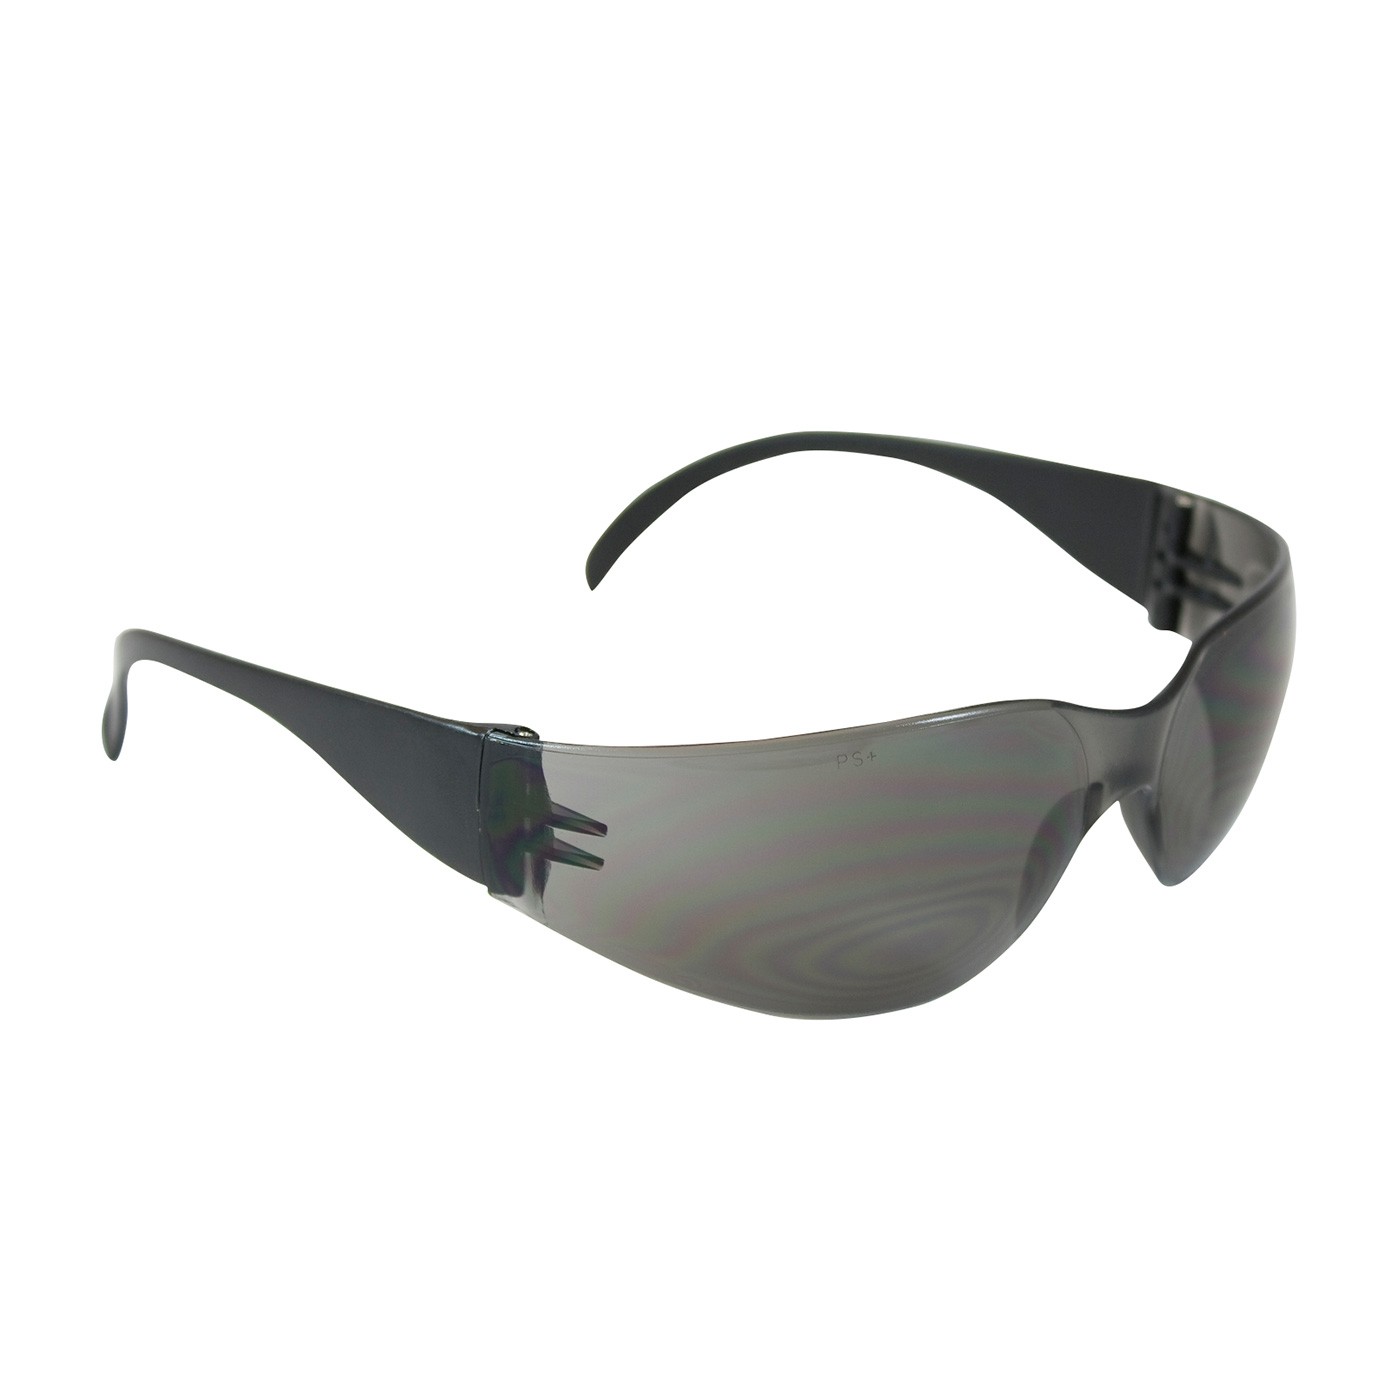 Zenon Z12™ Rimless Safety Glasses with Black Temple, Gray Lens and Anti-Scratch Coating  (#250-01-0001)